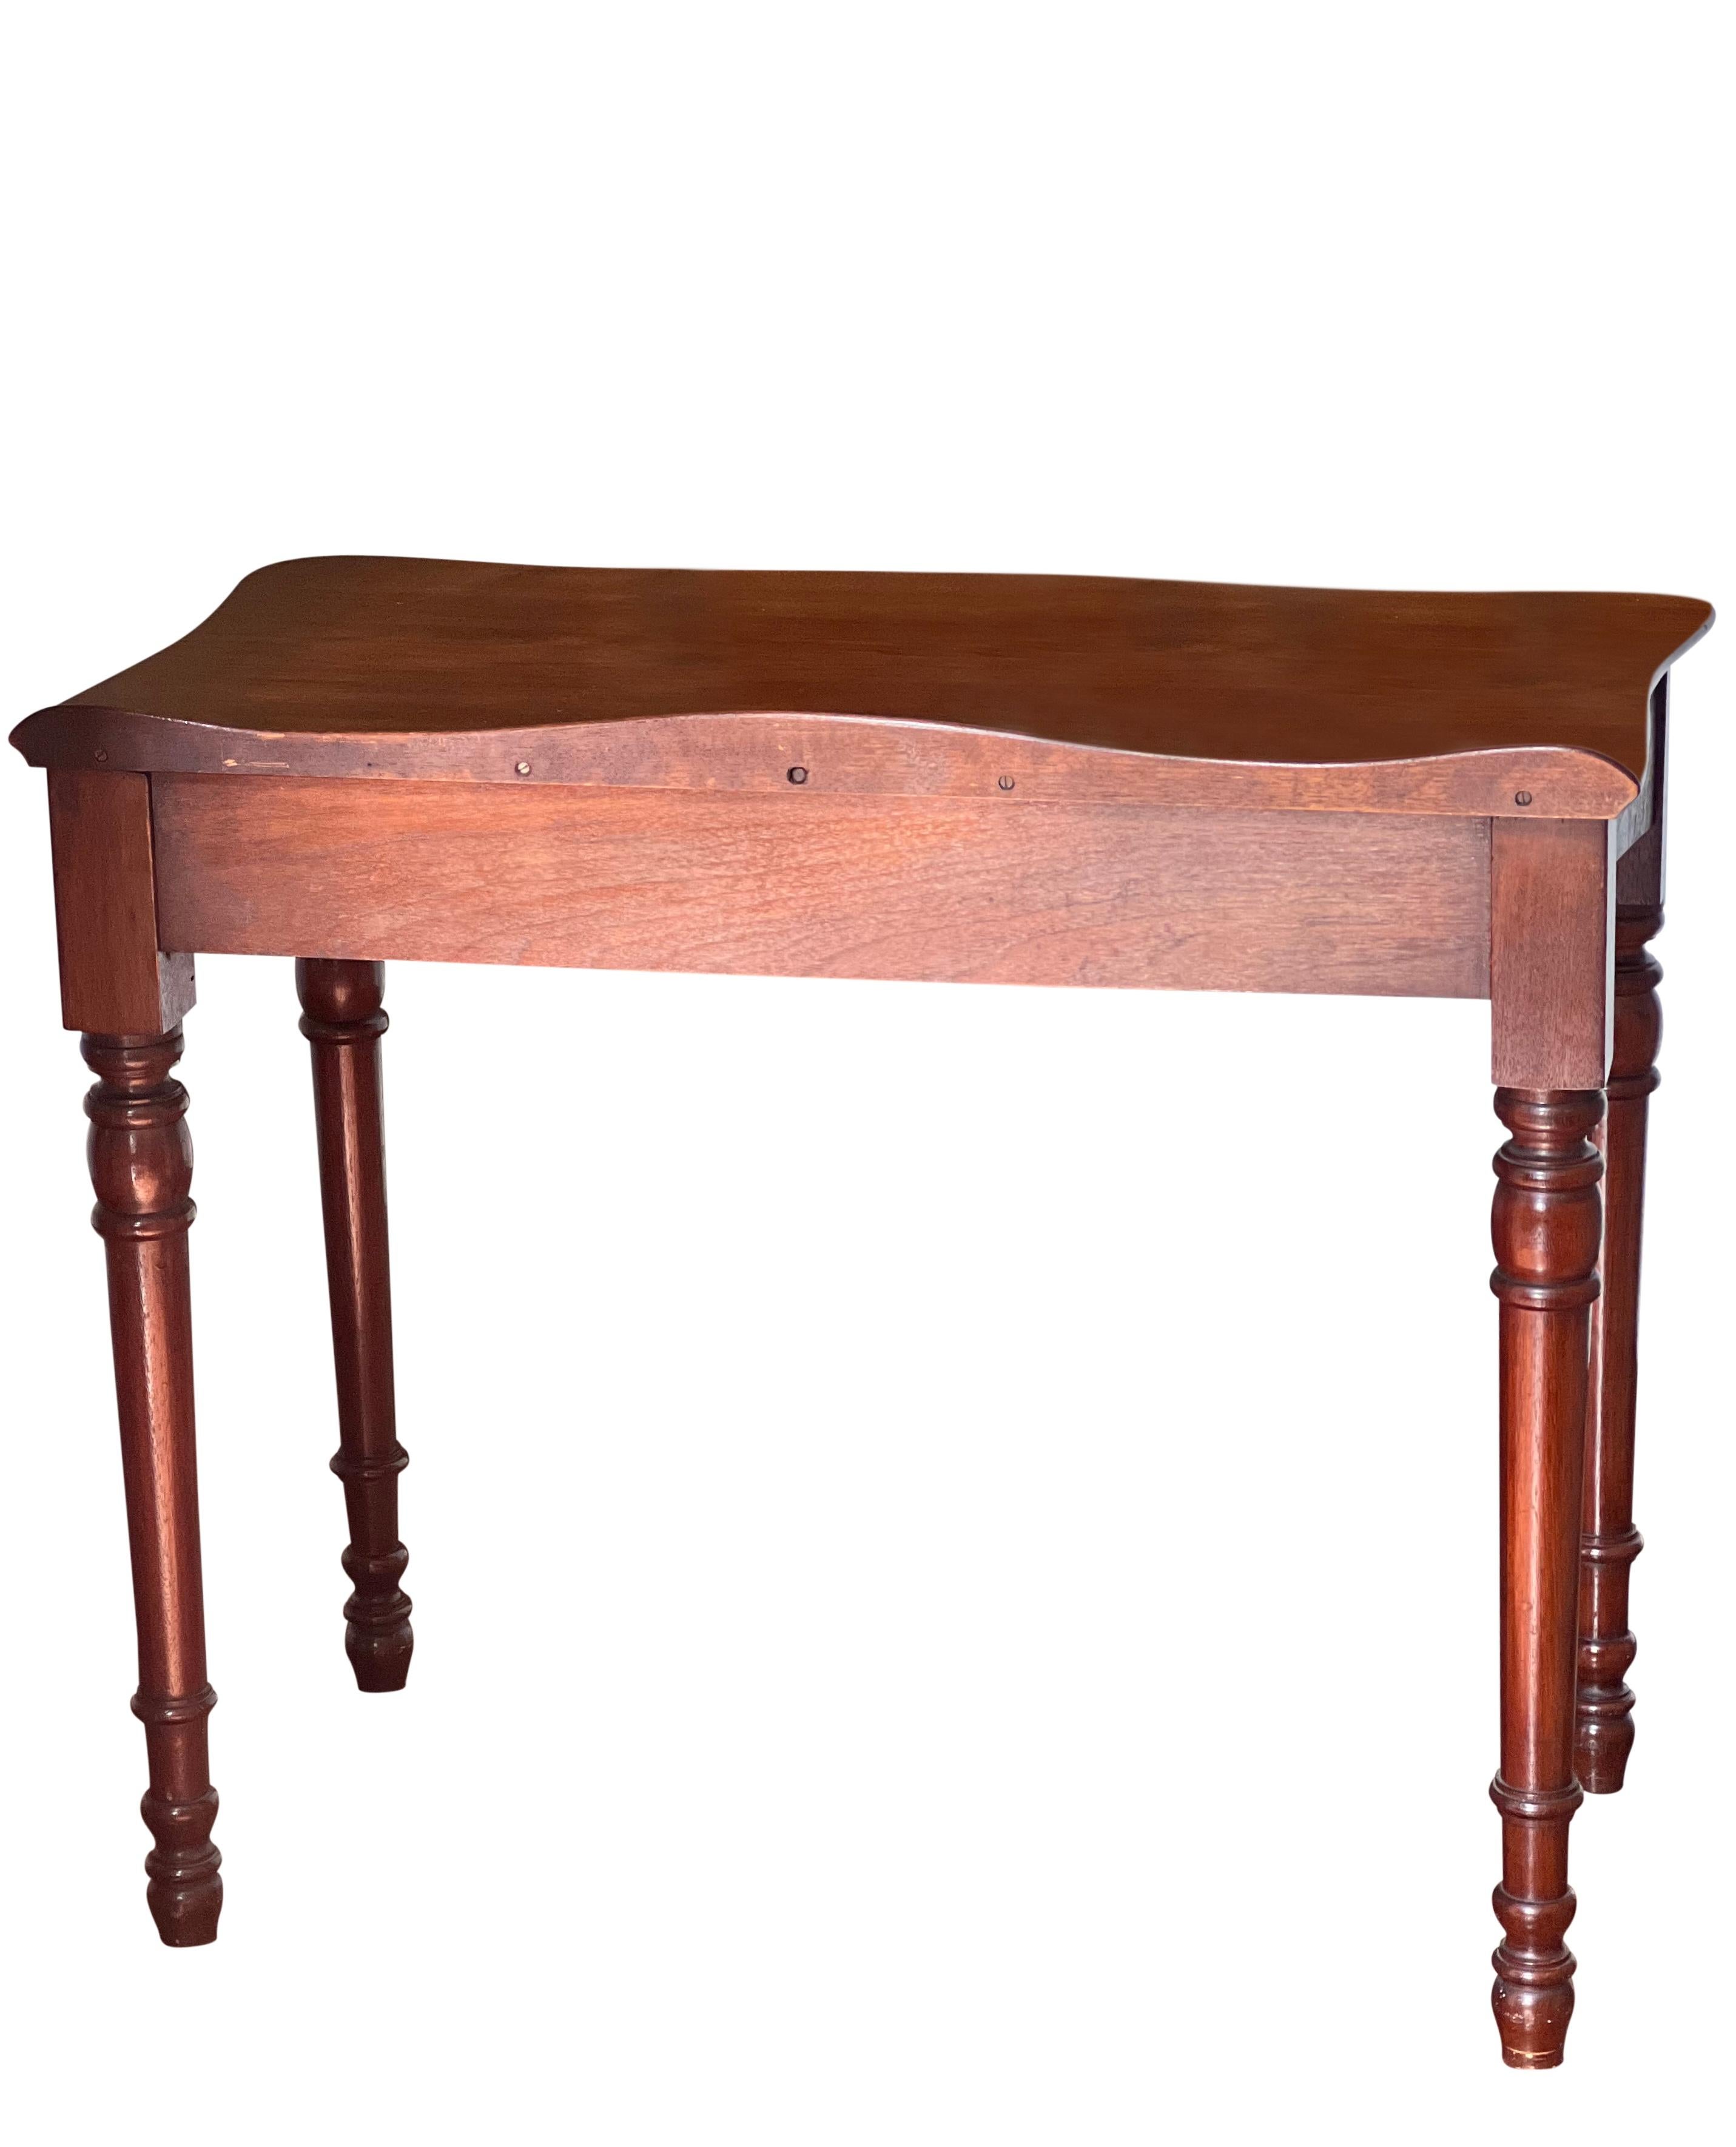 19th Century English Mahogany Serpentine Writing Desk with Single Drawer For Sale 1